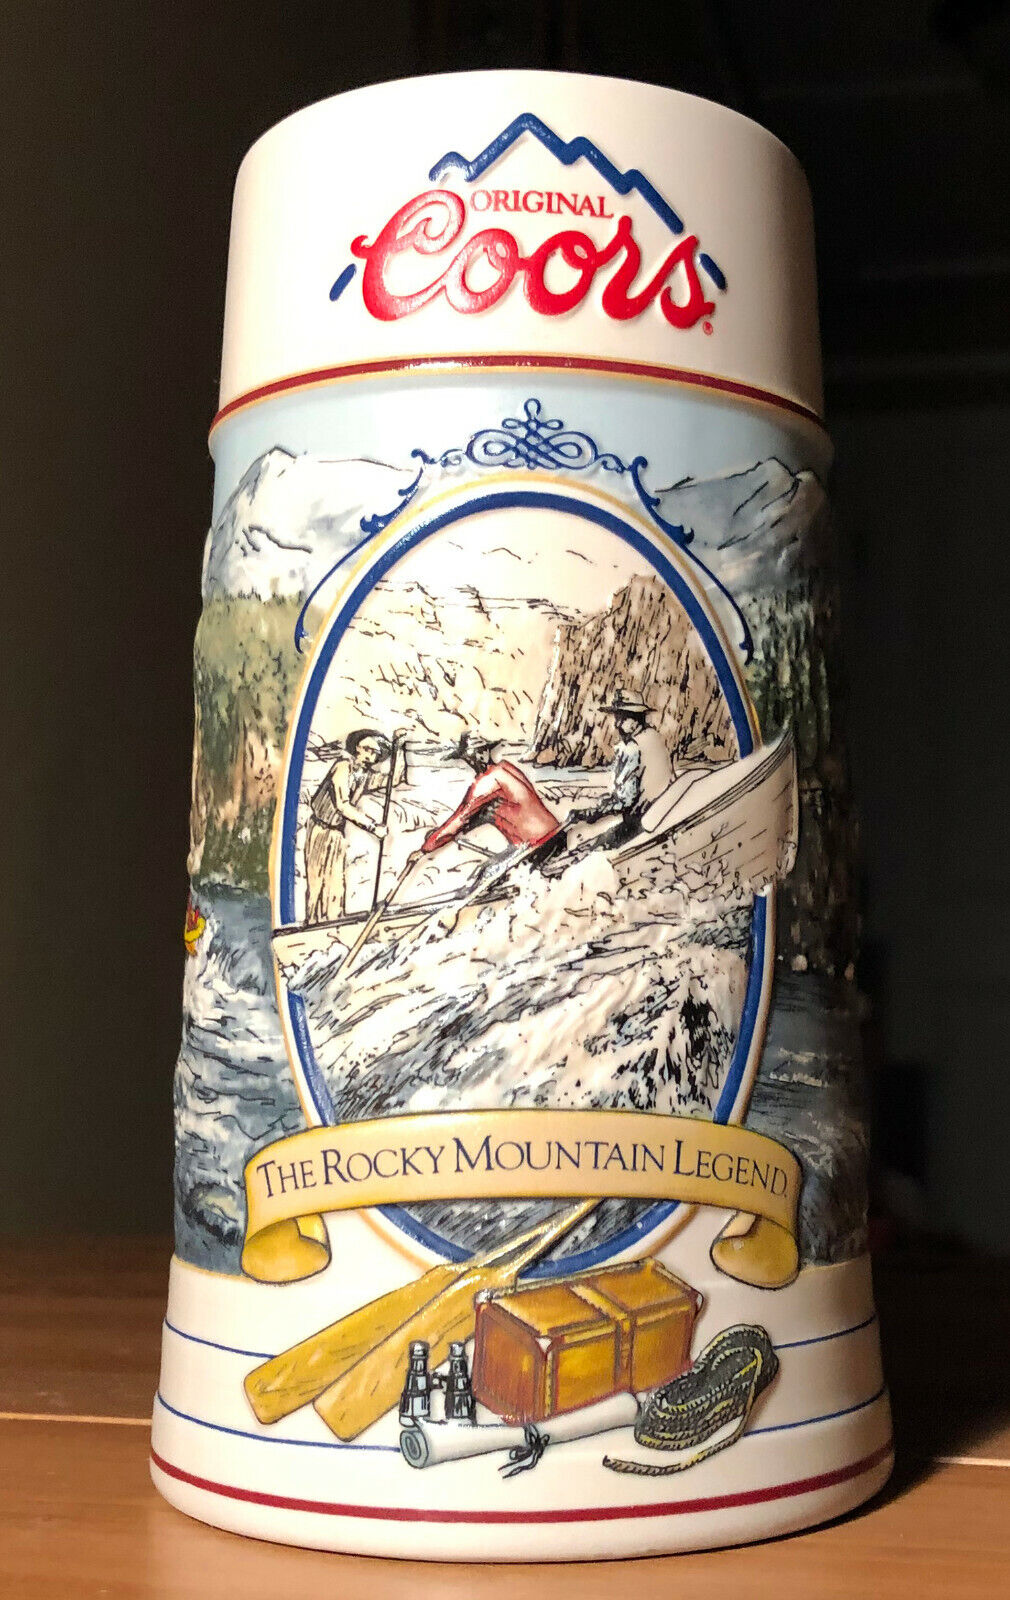 Vintage Lmt Ed Coors Ceramic Porcelain Beer Stein White Water Rafting Rocky Mtns